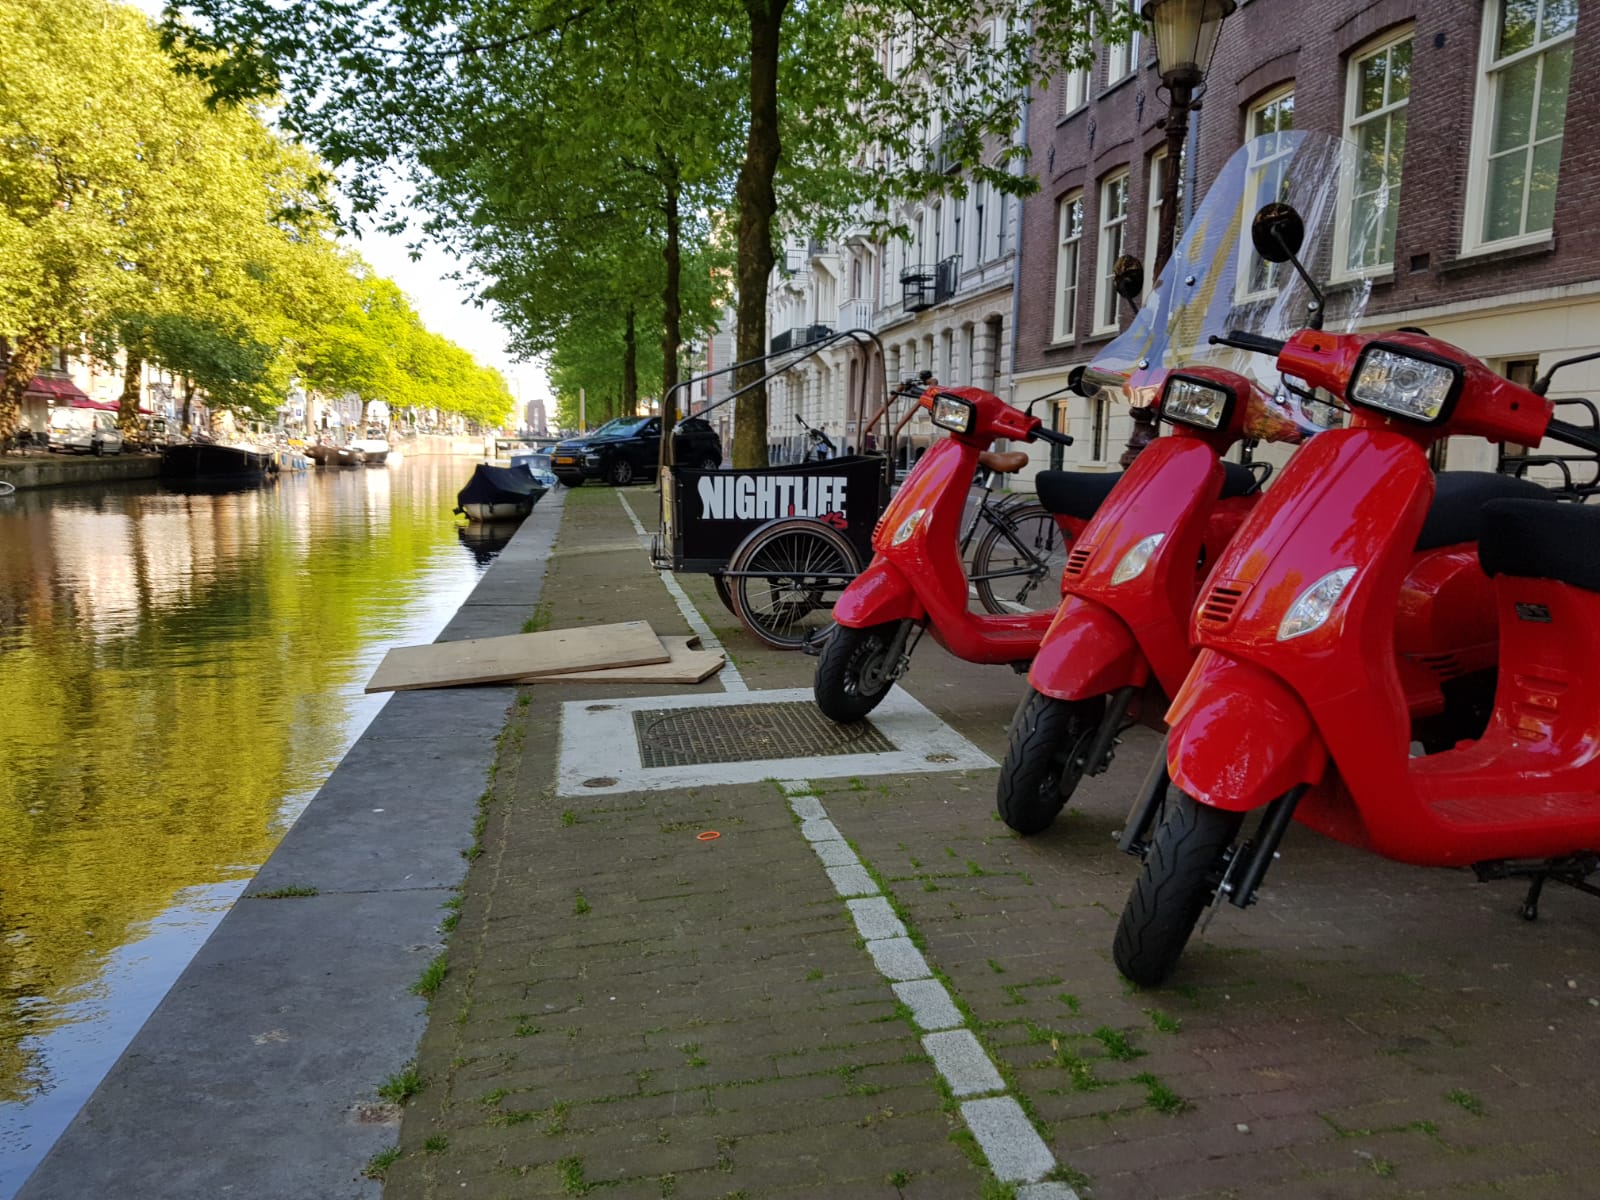 Scooter Rental - Are Amsterdam